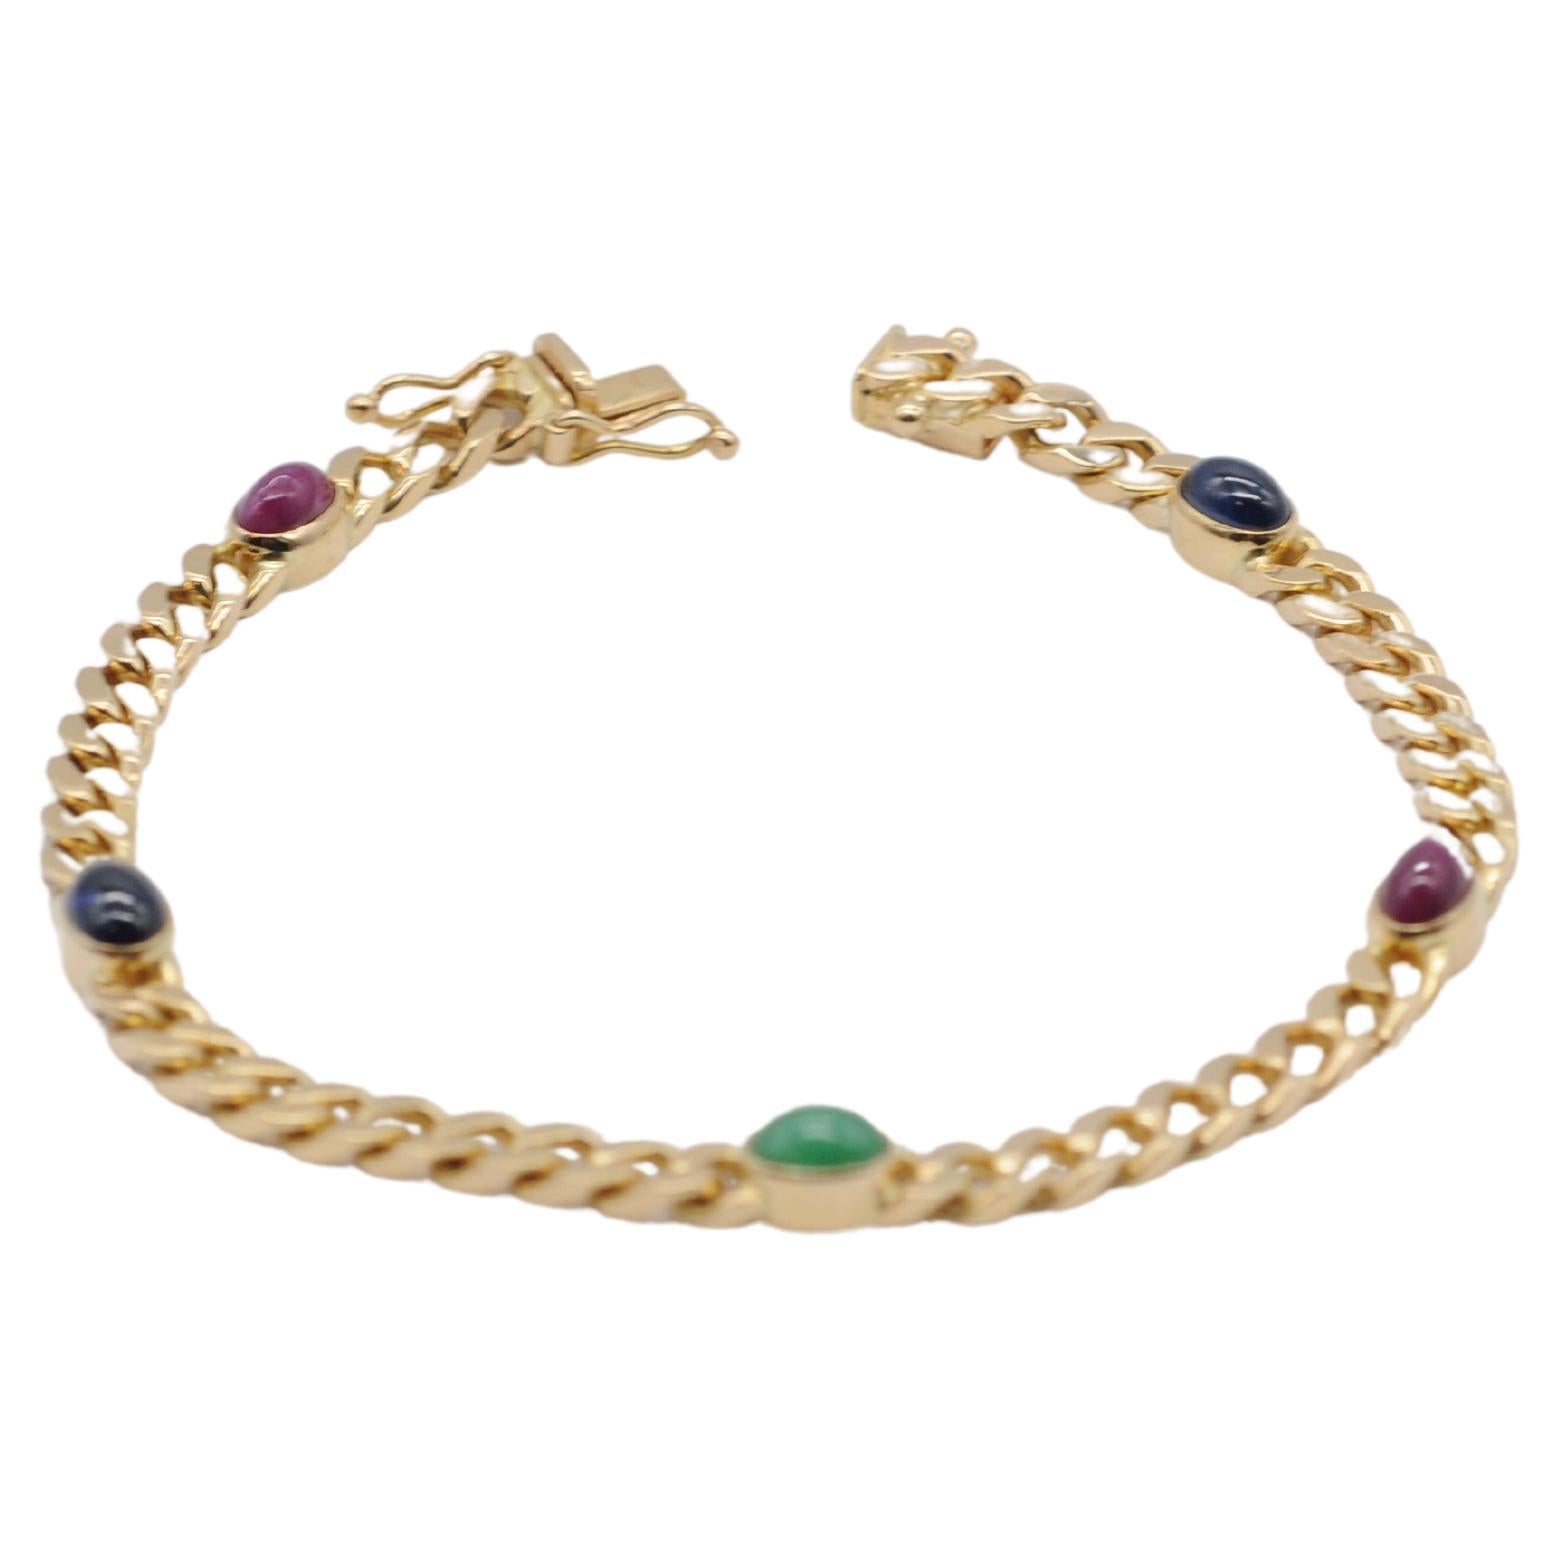 Noble 14k yellow gold bracelet with cabochon For Sale